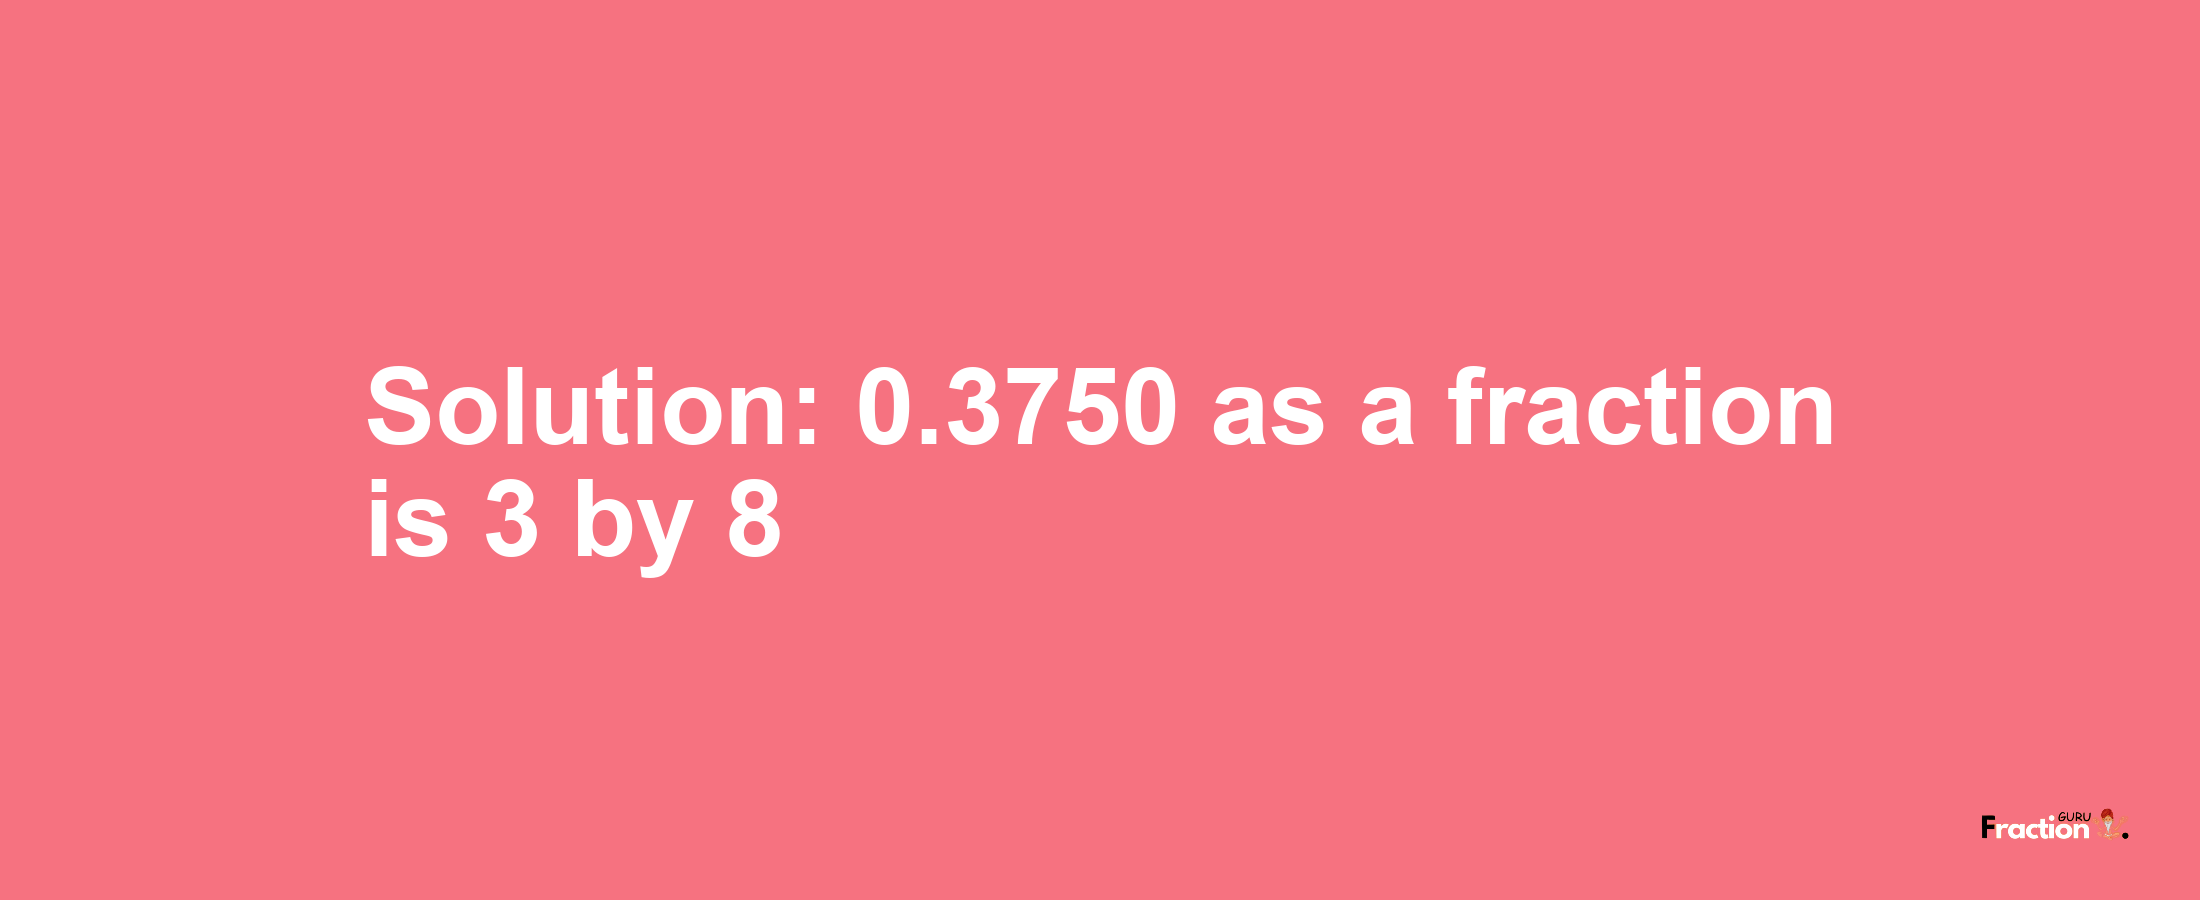 Solution:0.3750 as a fraction is 3/8